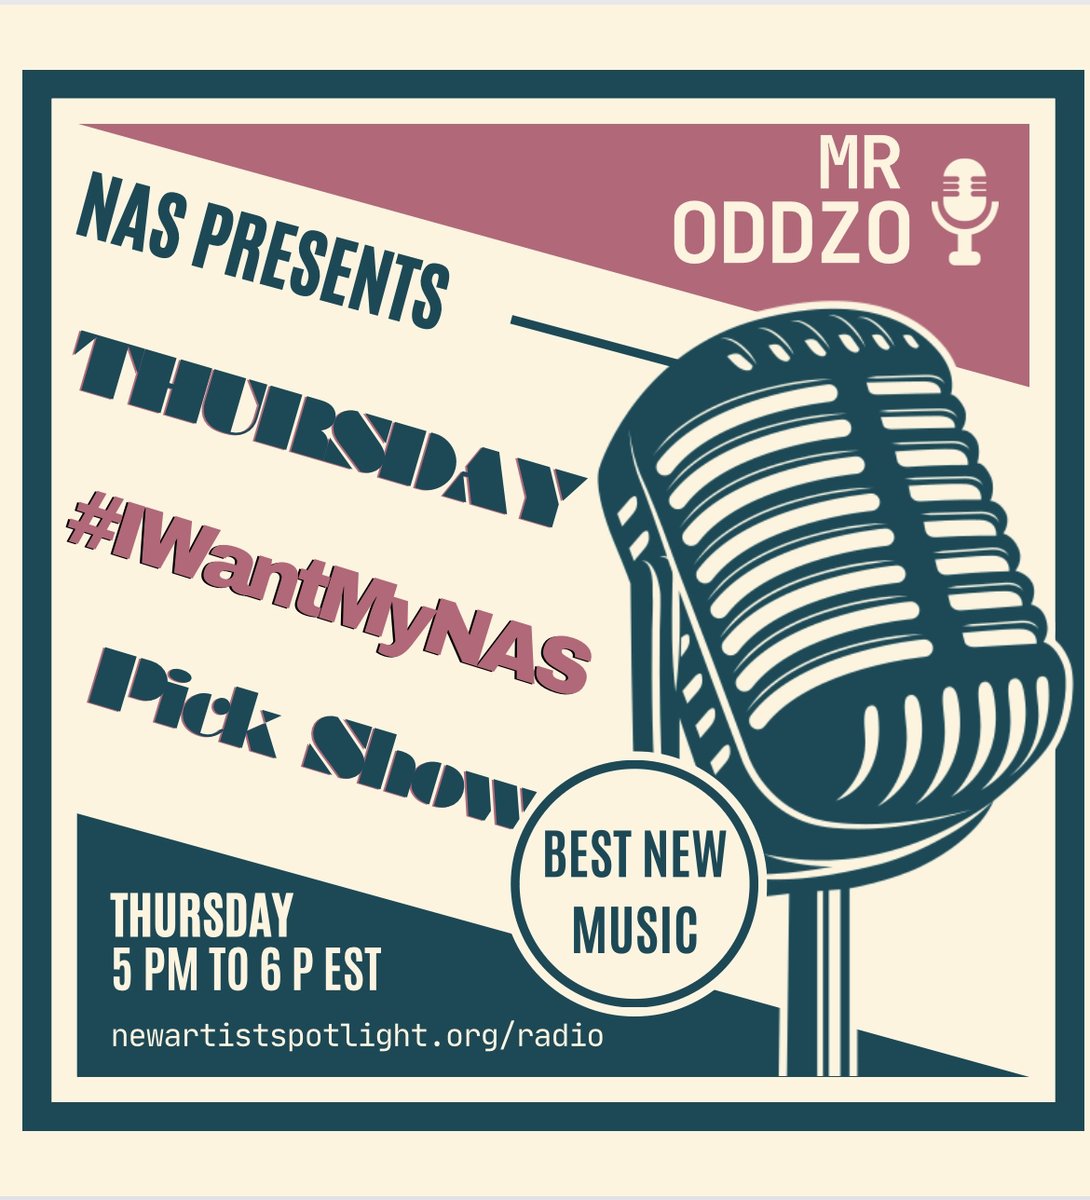 Coming up today on @NASIndieRadio it's @MrOddzo's Thursday Pick Show! 🎯 Featuring a treasure trove of this week's @NAS_Spotlight pix and always some surprises! Not to be missed!! 2PM PT | 5PM ET | 9PM GMT #indiemusic #StopPayola newartistspotlight.org/radio